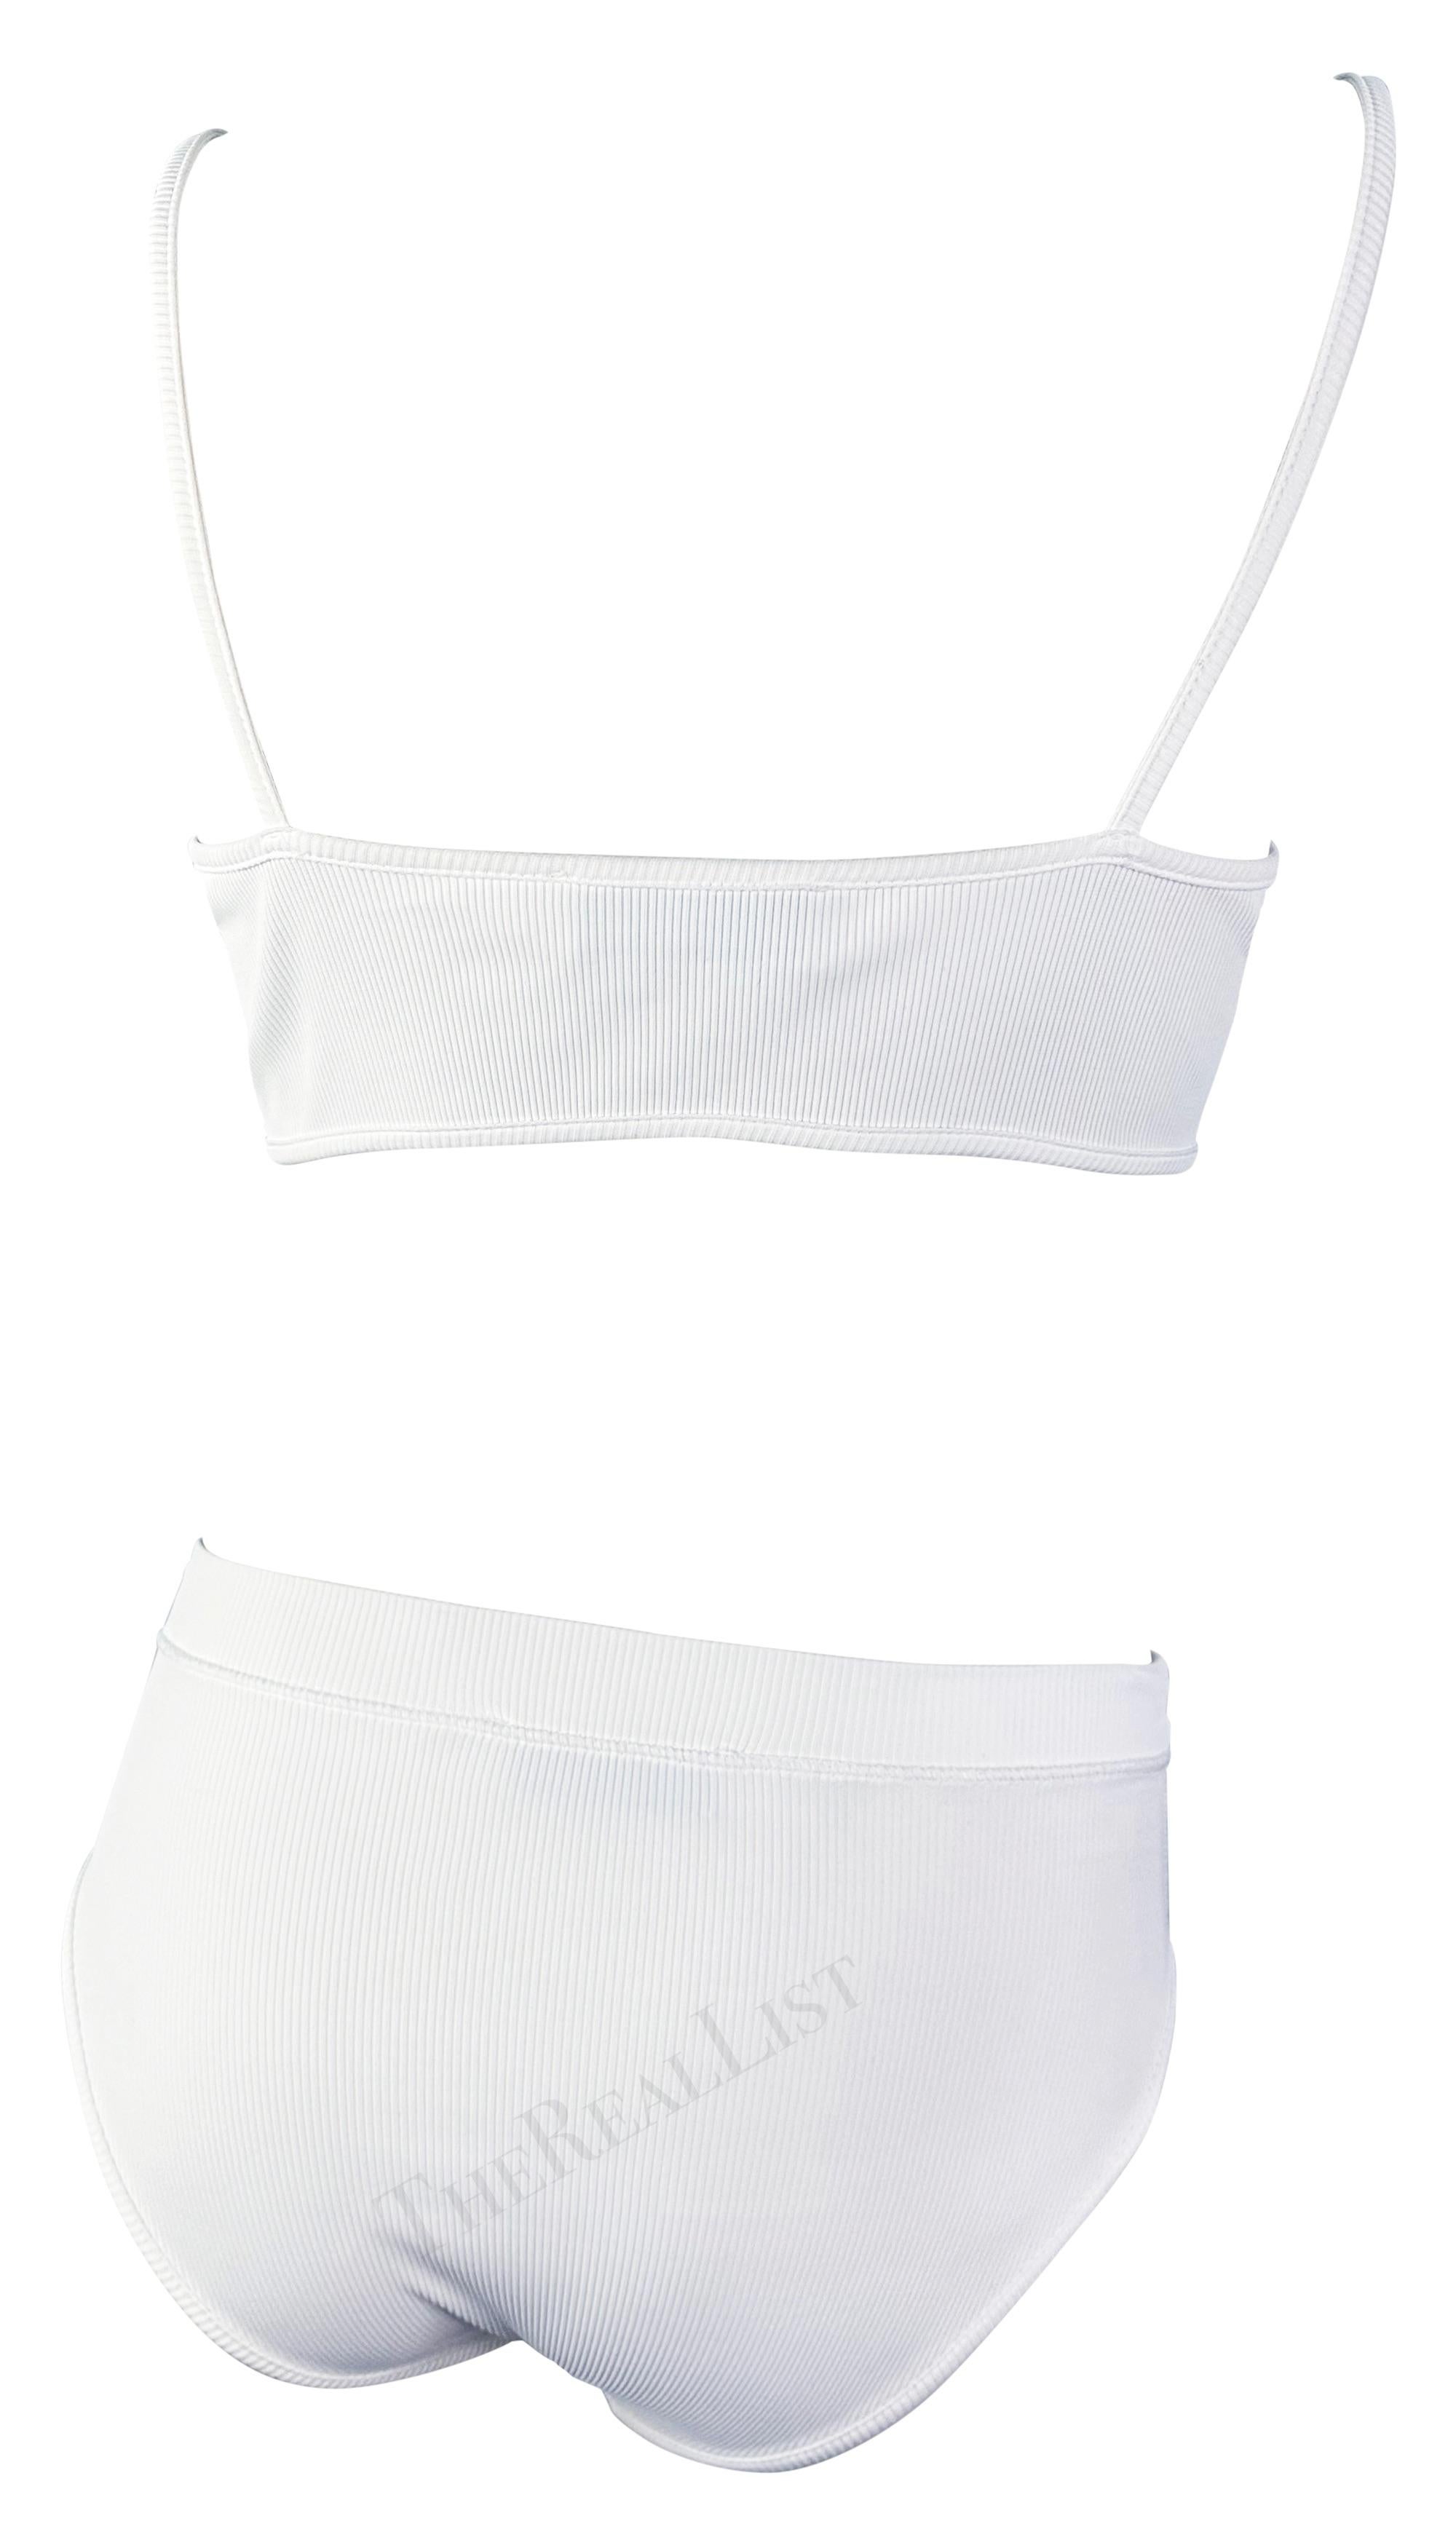 Women's or Men's Early 1990s Dolce & Gabbana White Ribbed Brief Beach Bikini Two-Piece Set For Sale